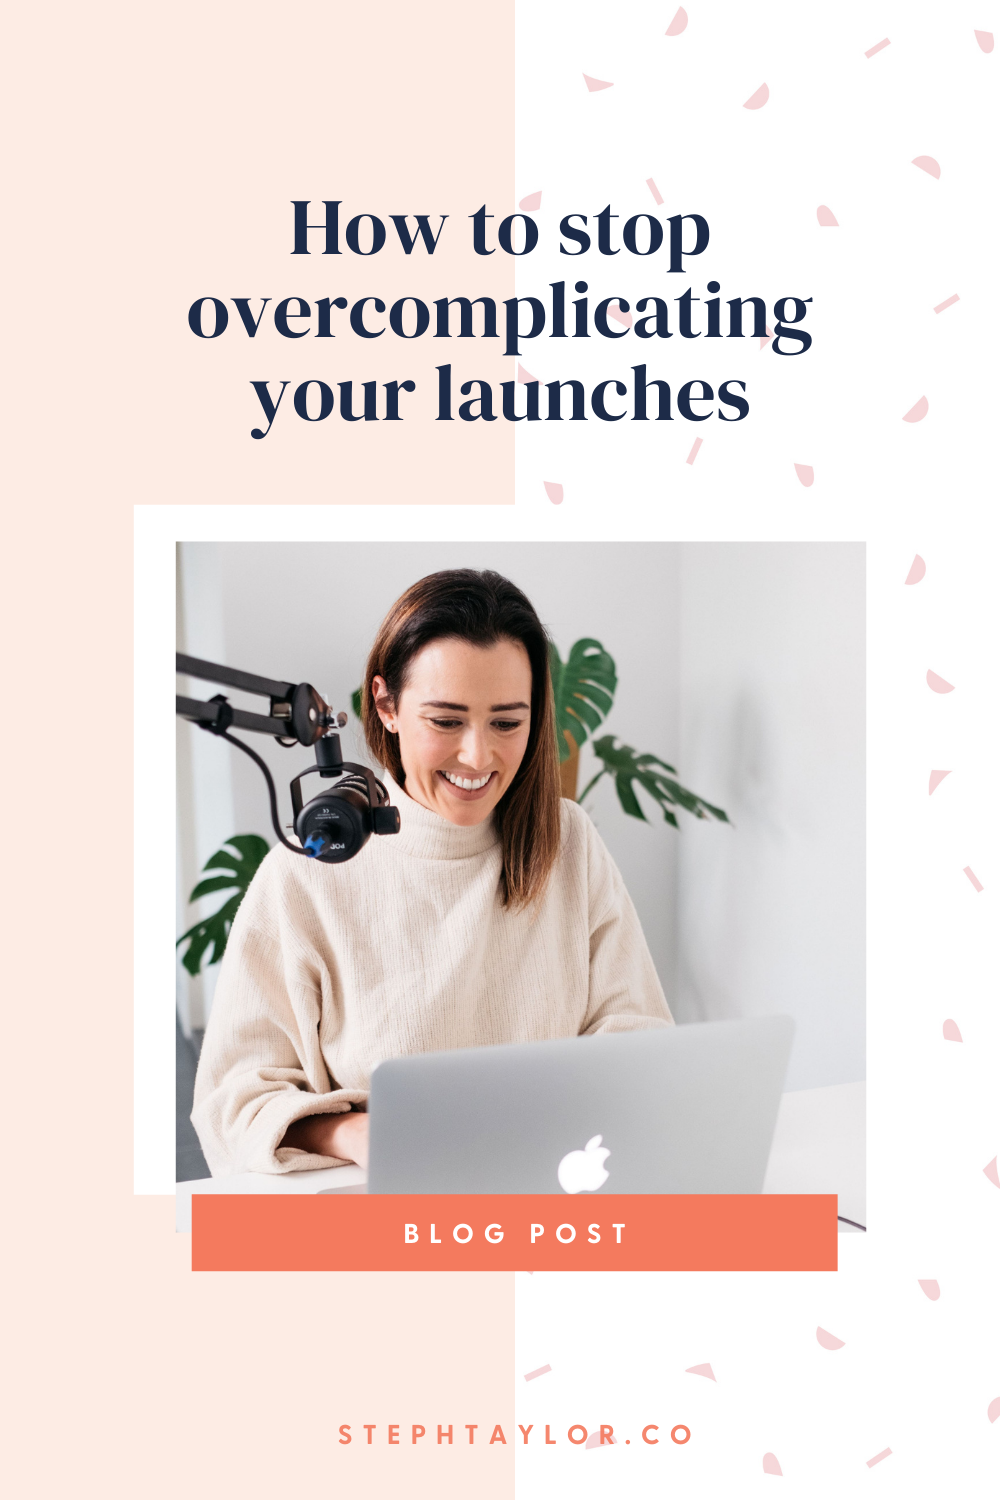 Stop overcomplicating your launches